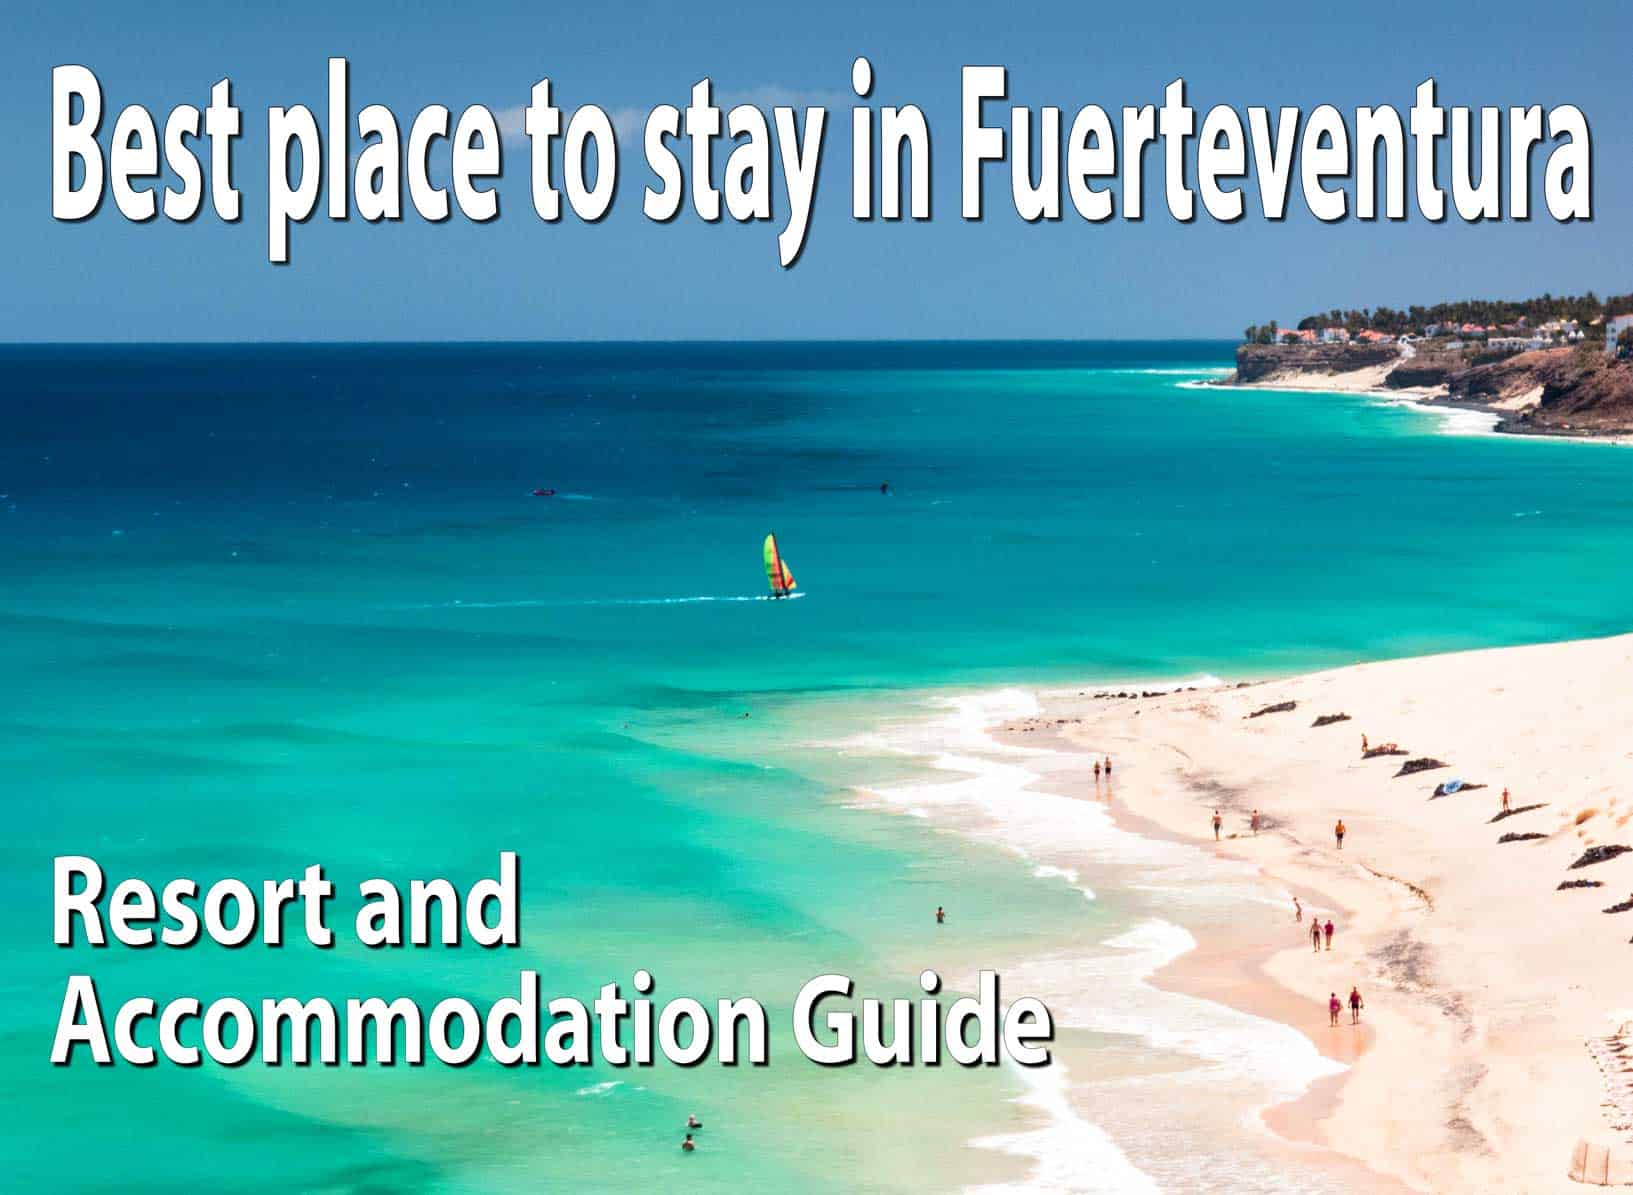 Where is the best place to stay in Fuerteventura?